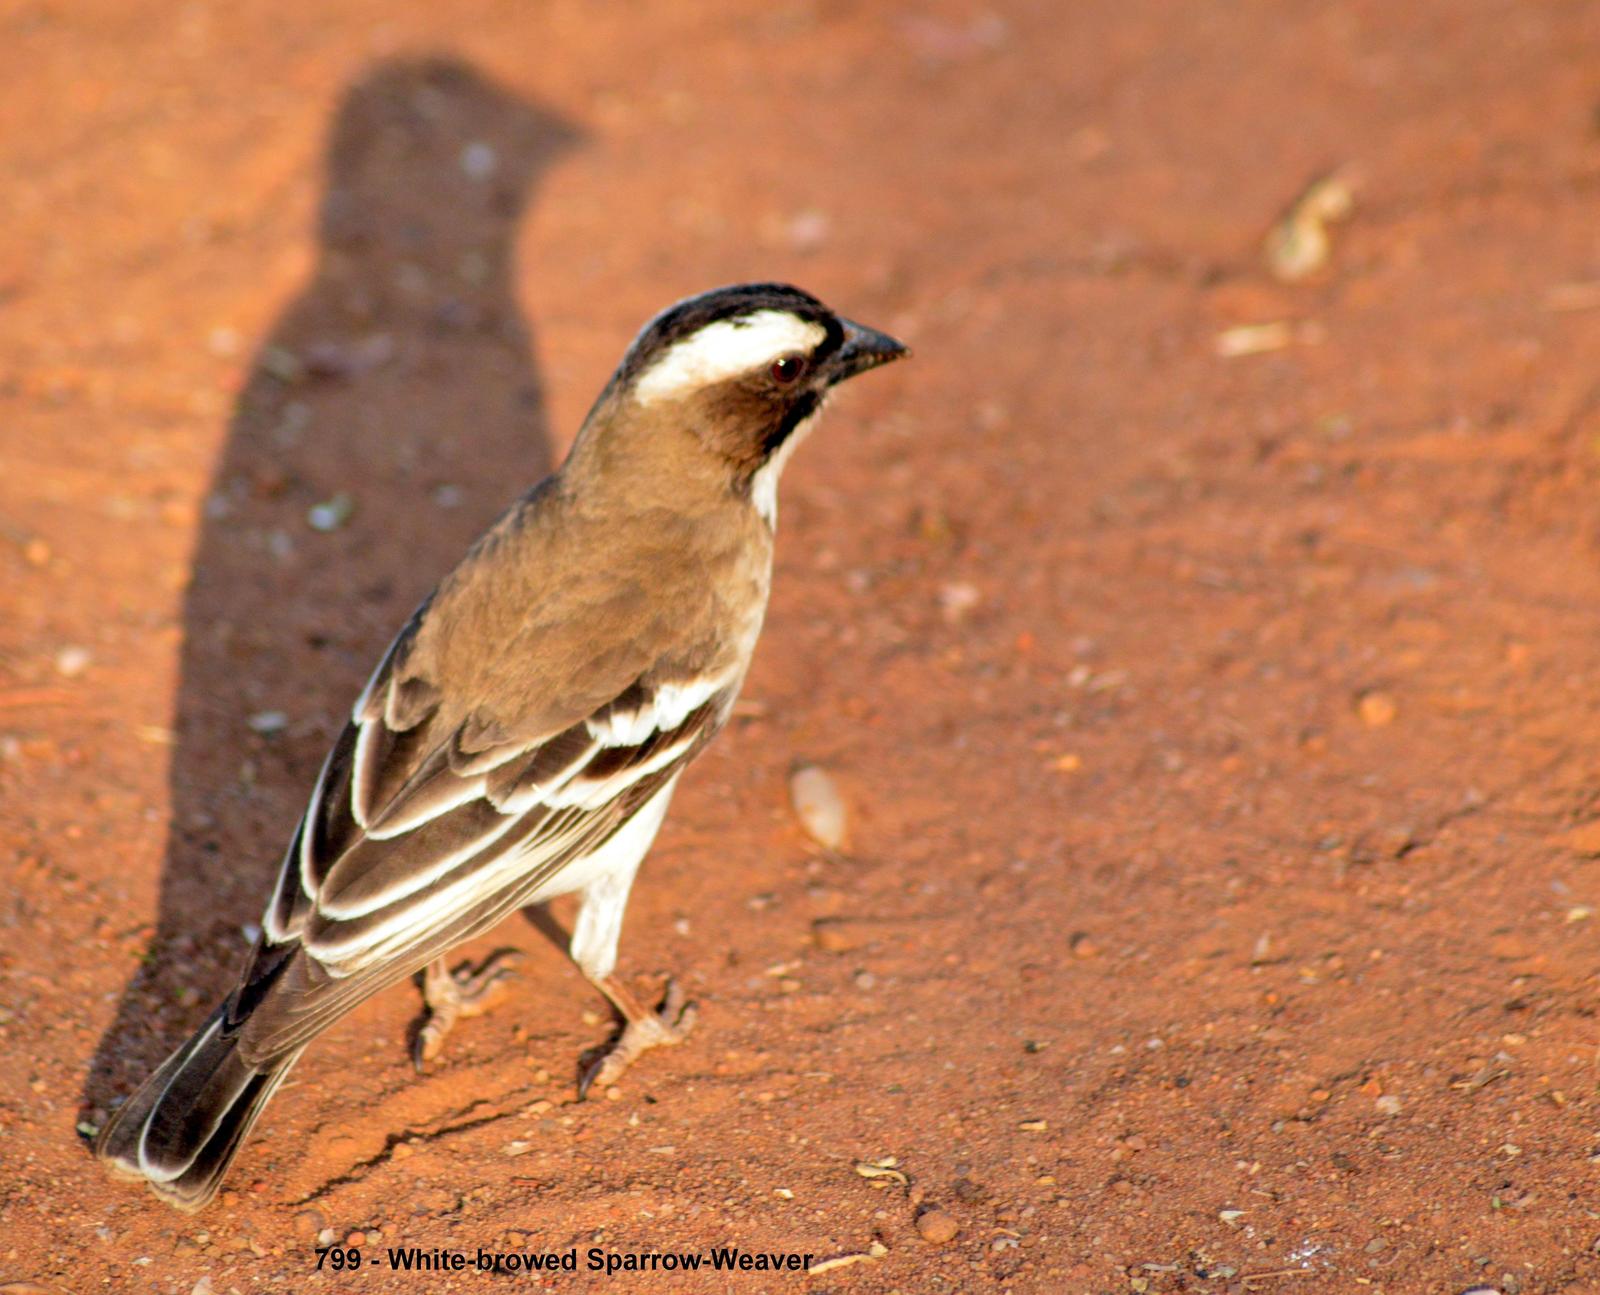 White-browed Sparrow-Weaver Photo by Richard  Lowe